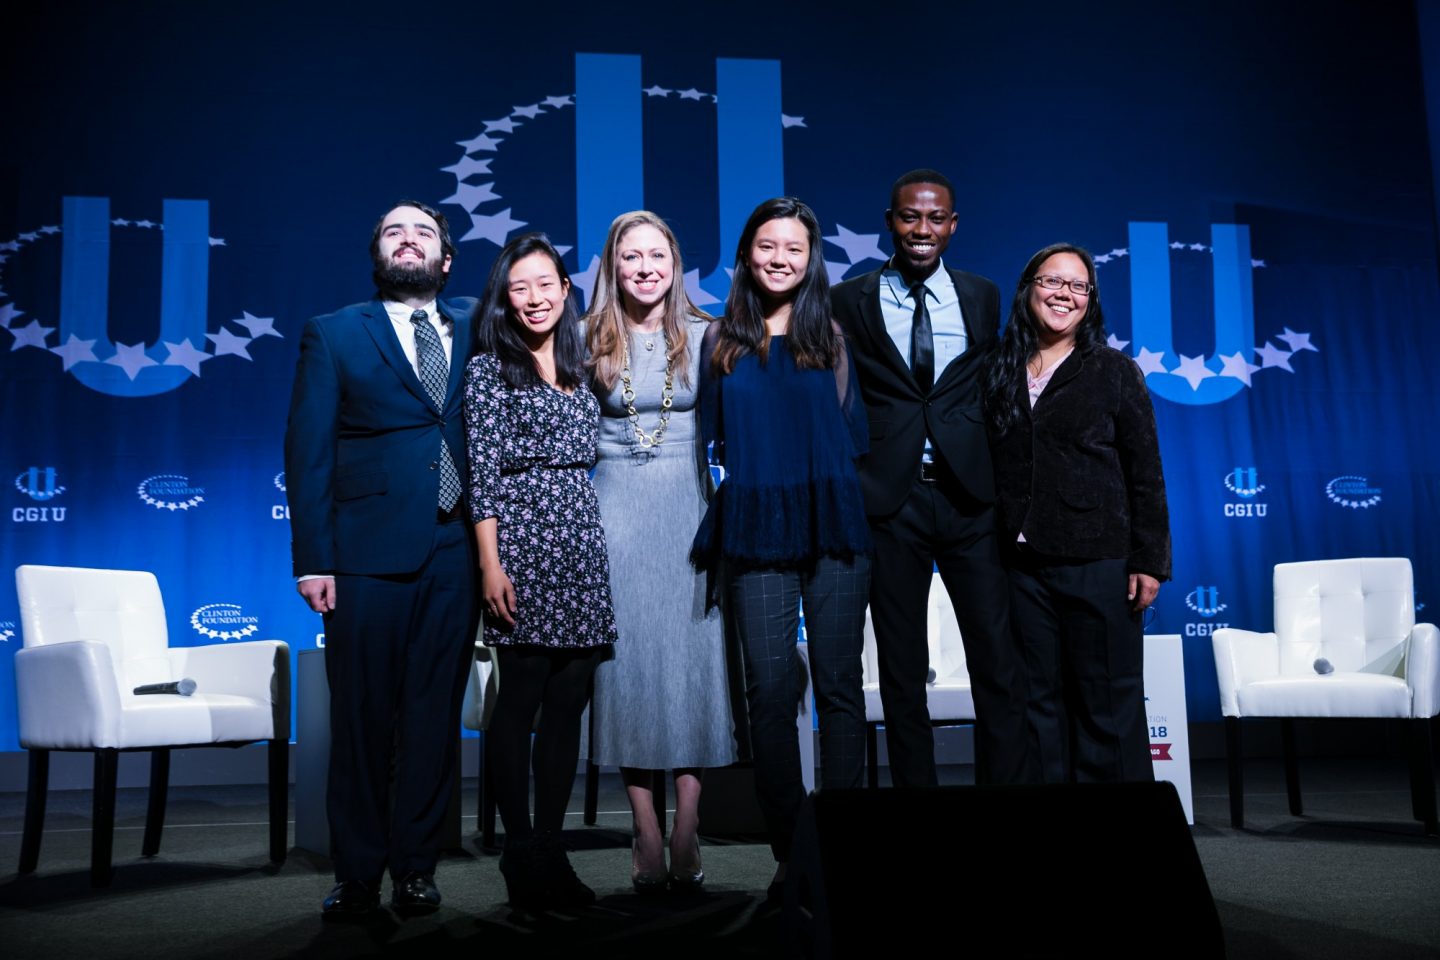 A group of students onstage with Chelsea Clinton during a CGI U event